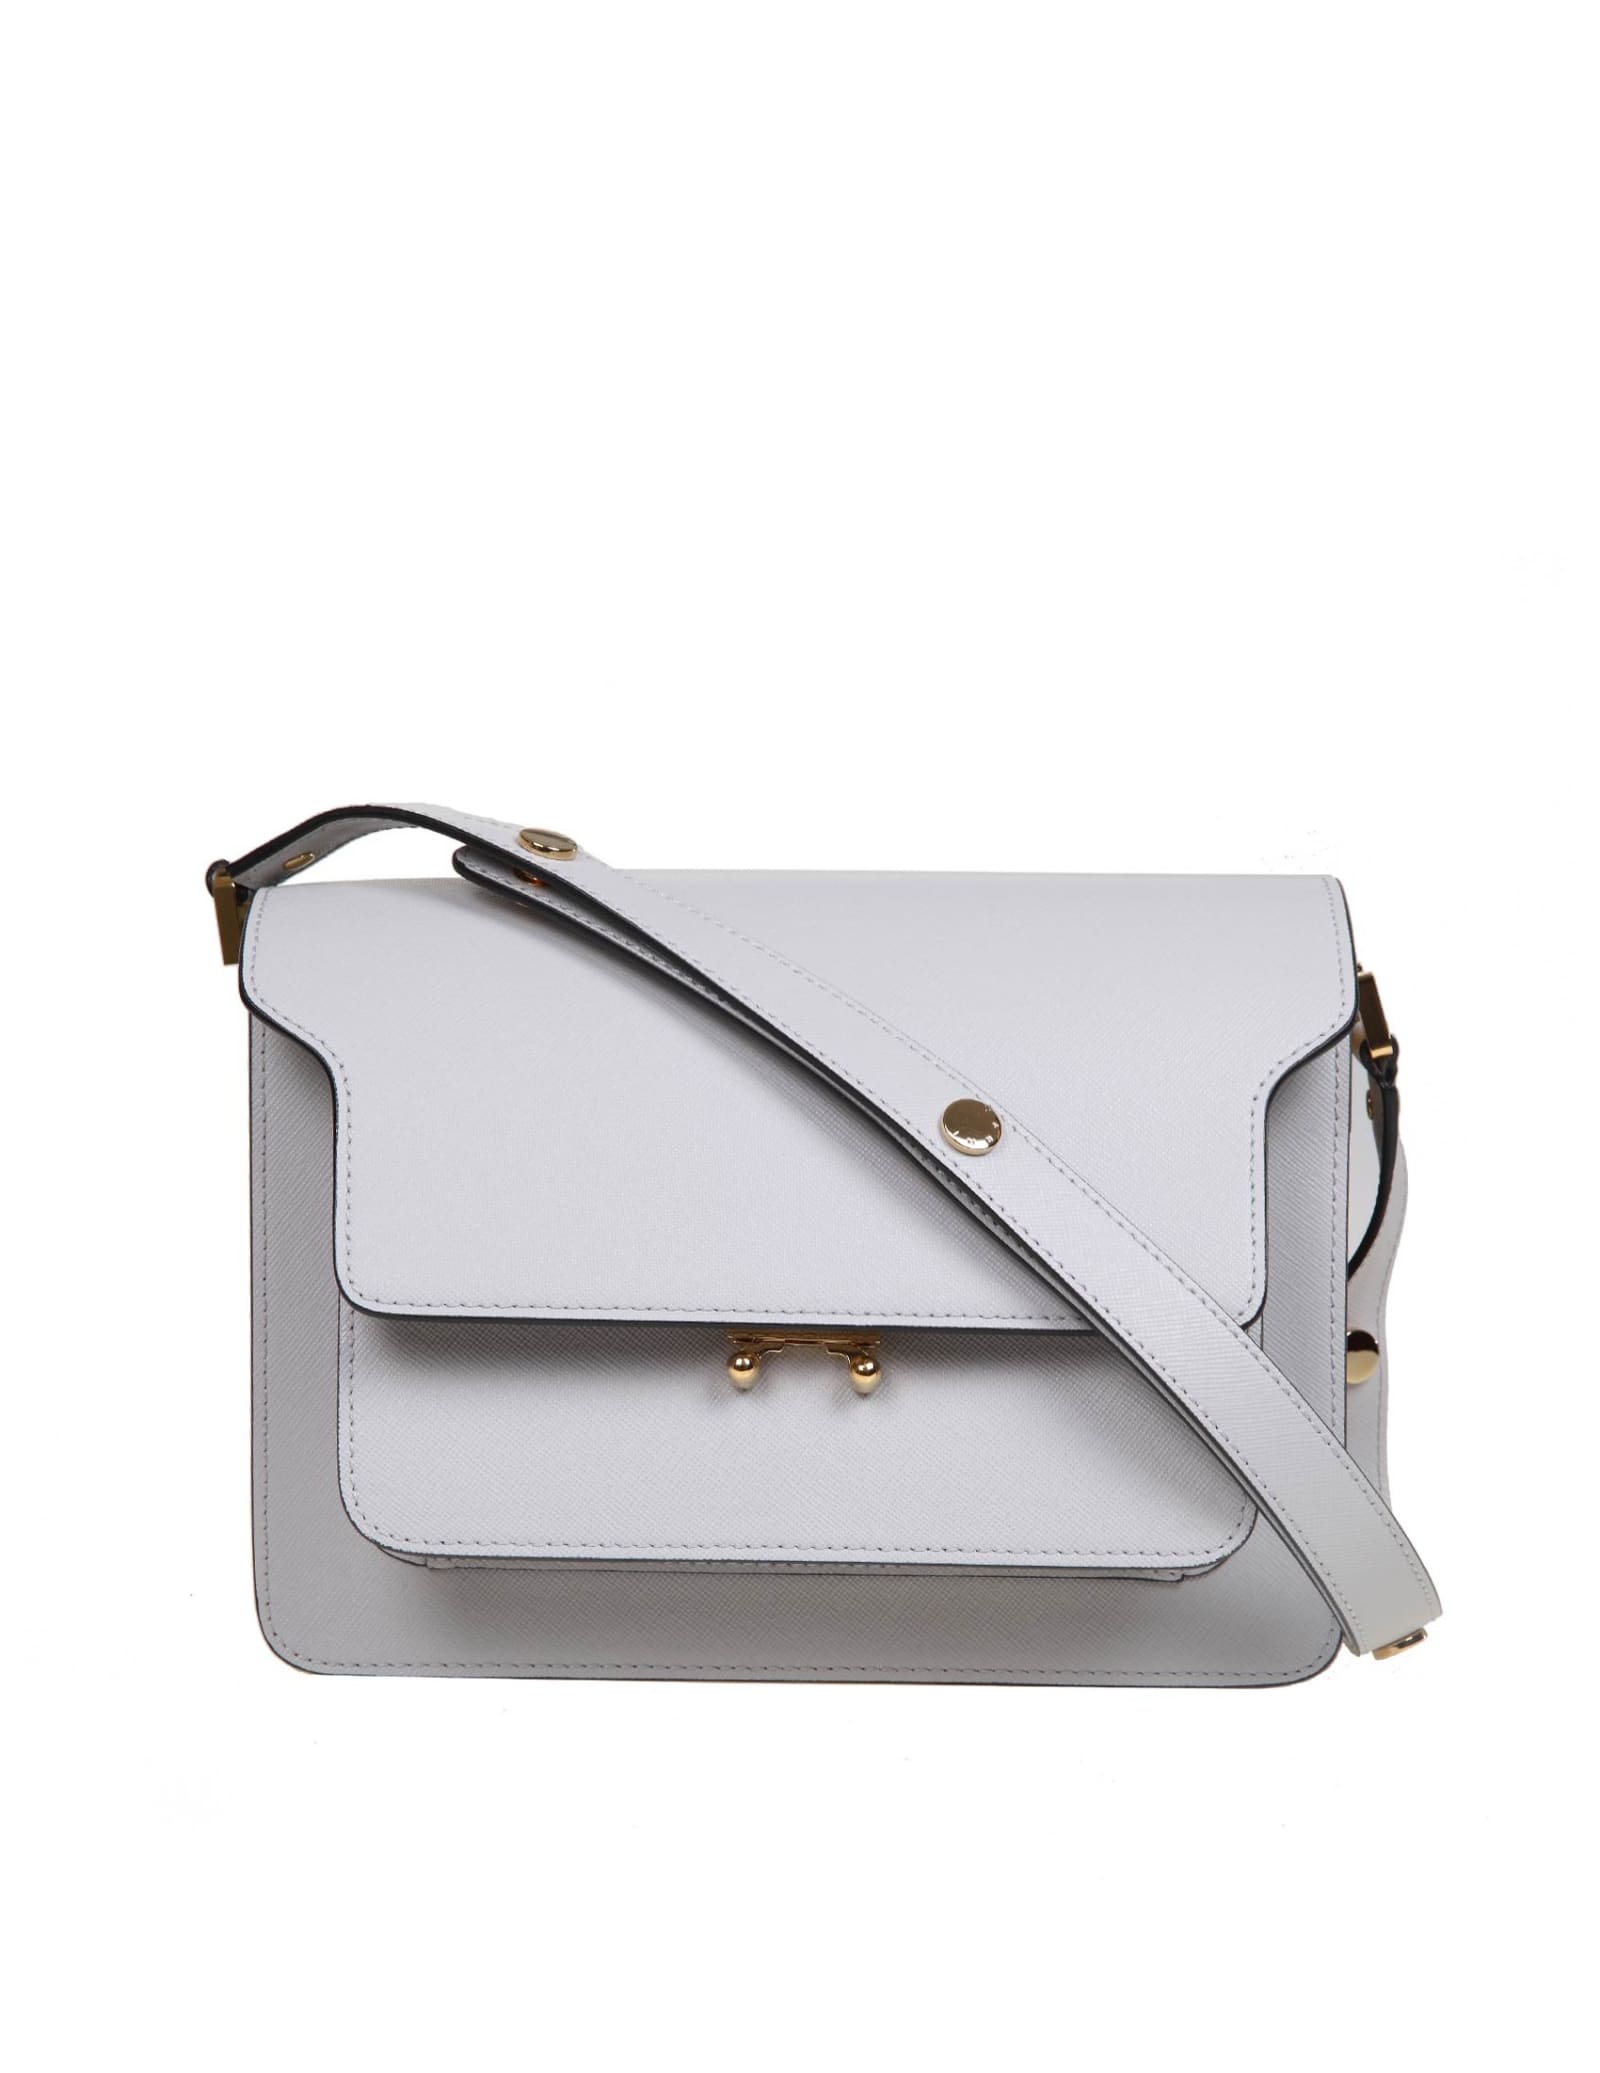 Marni Trunk Bag In Off White Leather